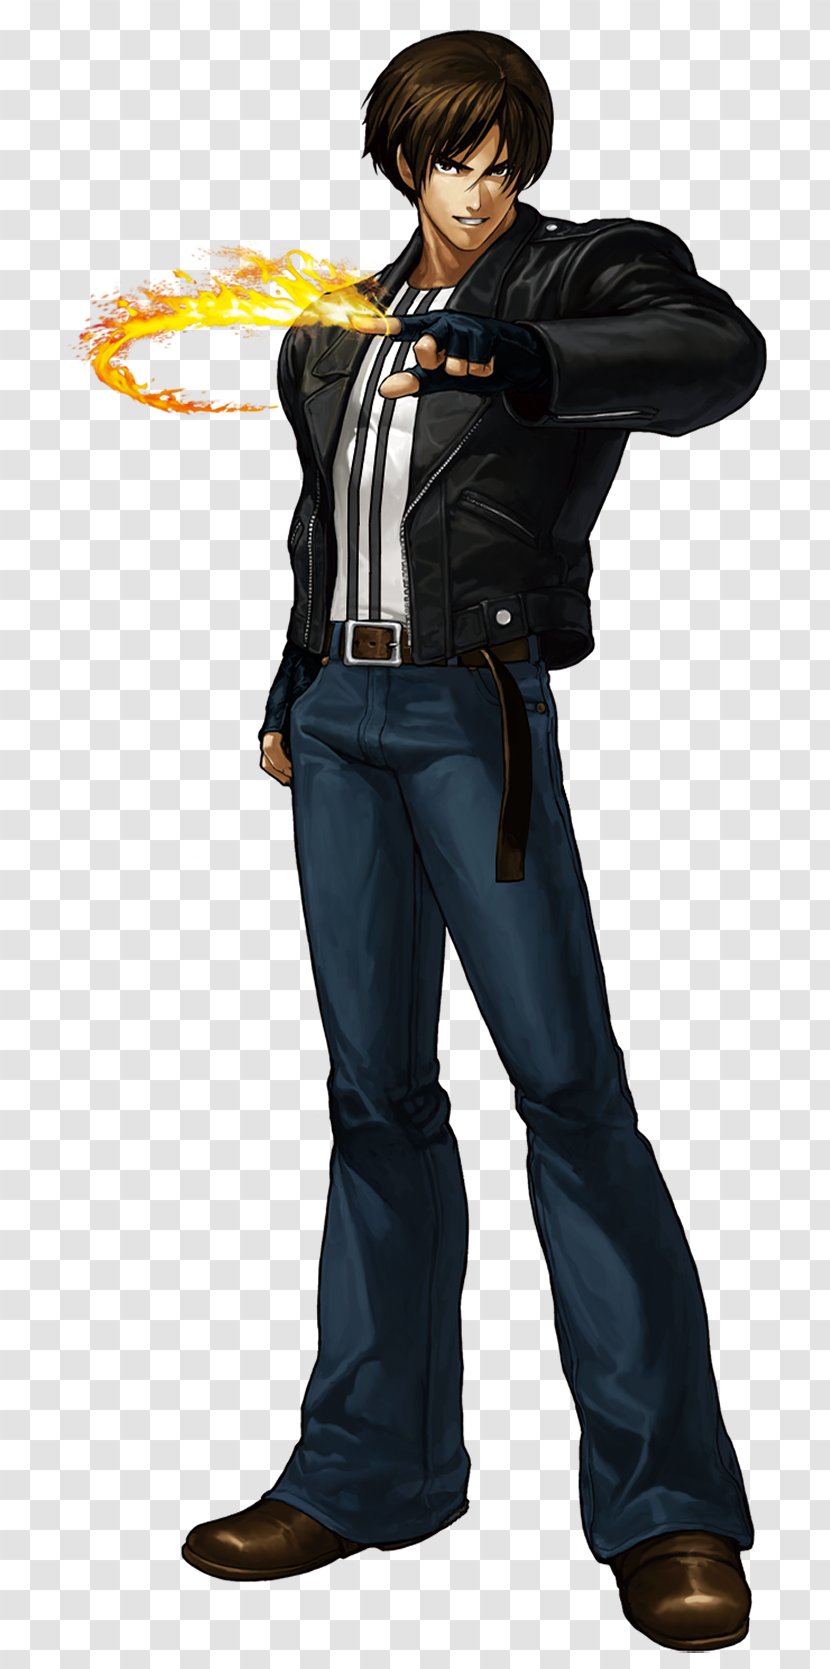 The King Of Fighters XIII Fighters: Maximum Impact Kyo Kusanagi '96 Iori Yagami - Standing - Mugen Souls Characters Transparent PNG